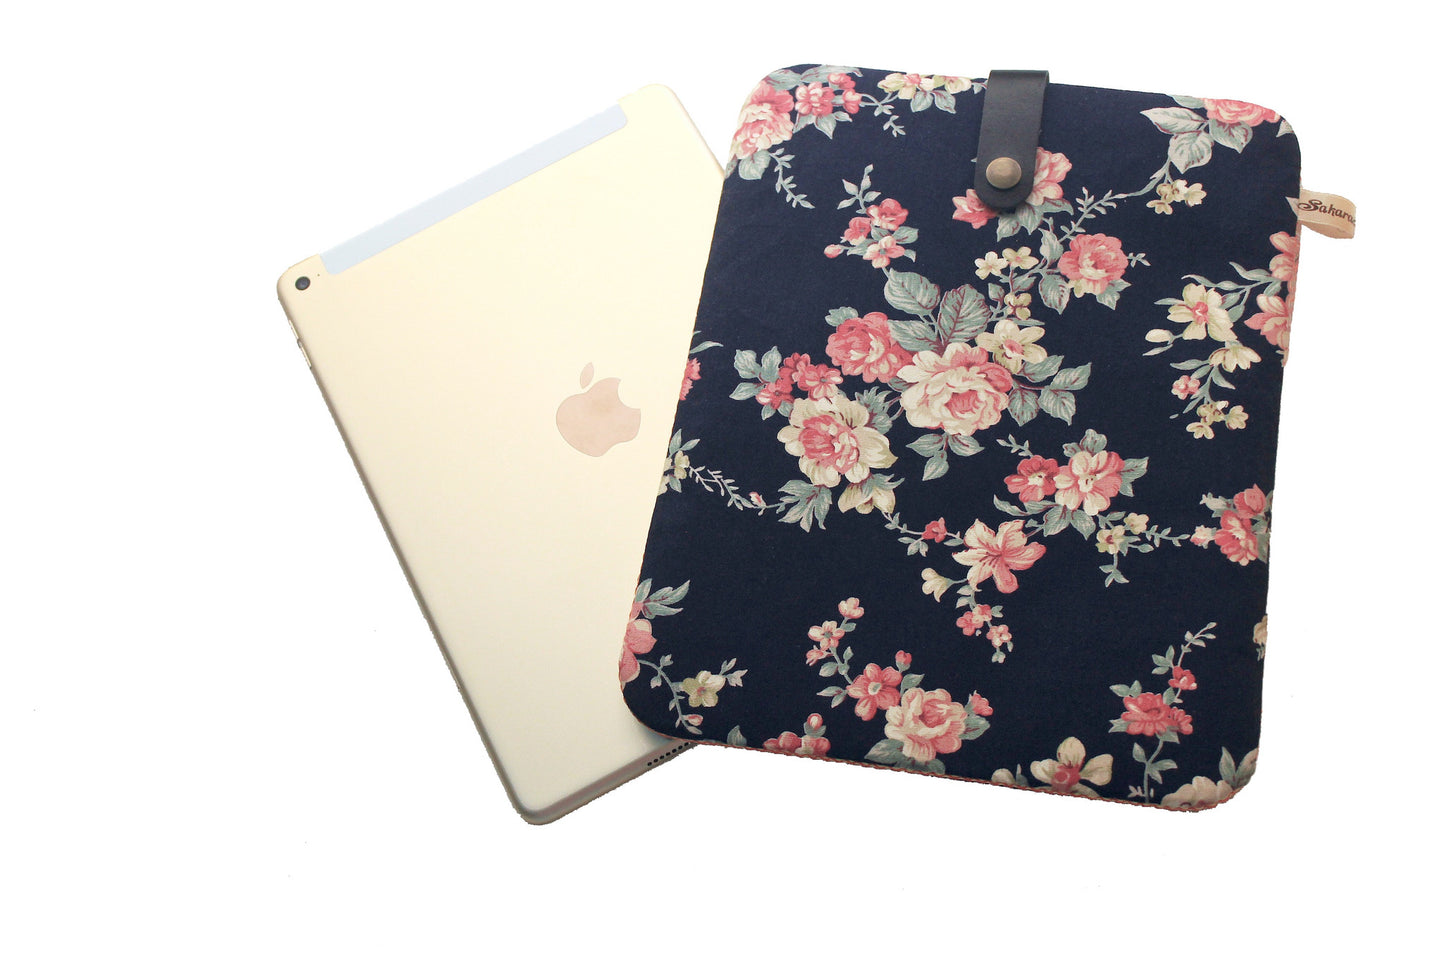 Apple iPad Air 2 and iPad Pro 9.7 Inch Cover - Best 9.7 Inch Tablet Case